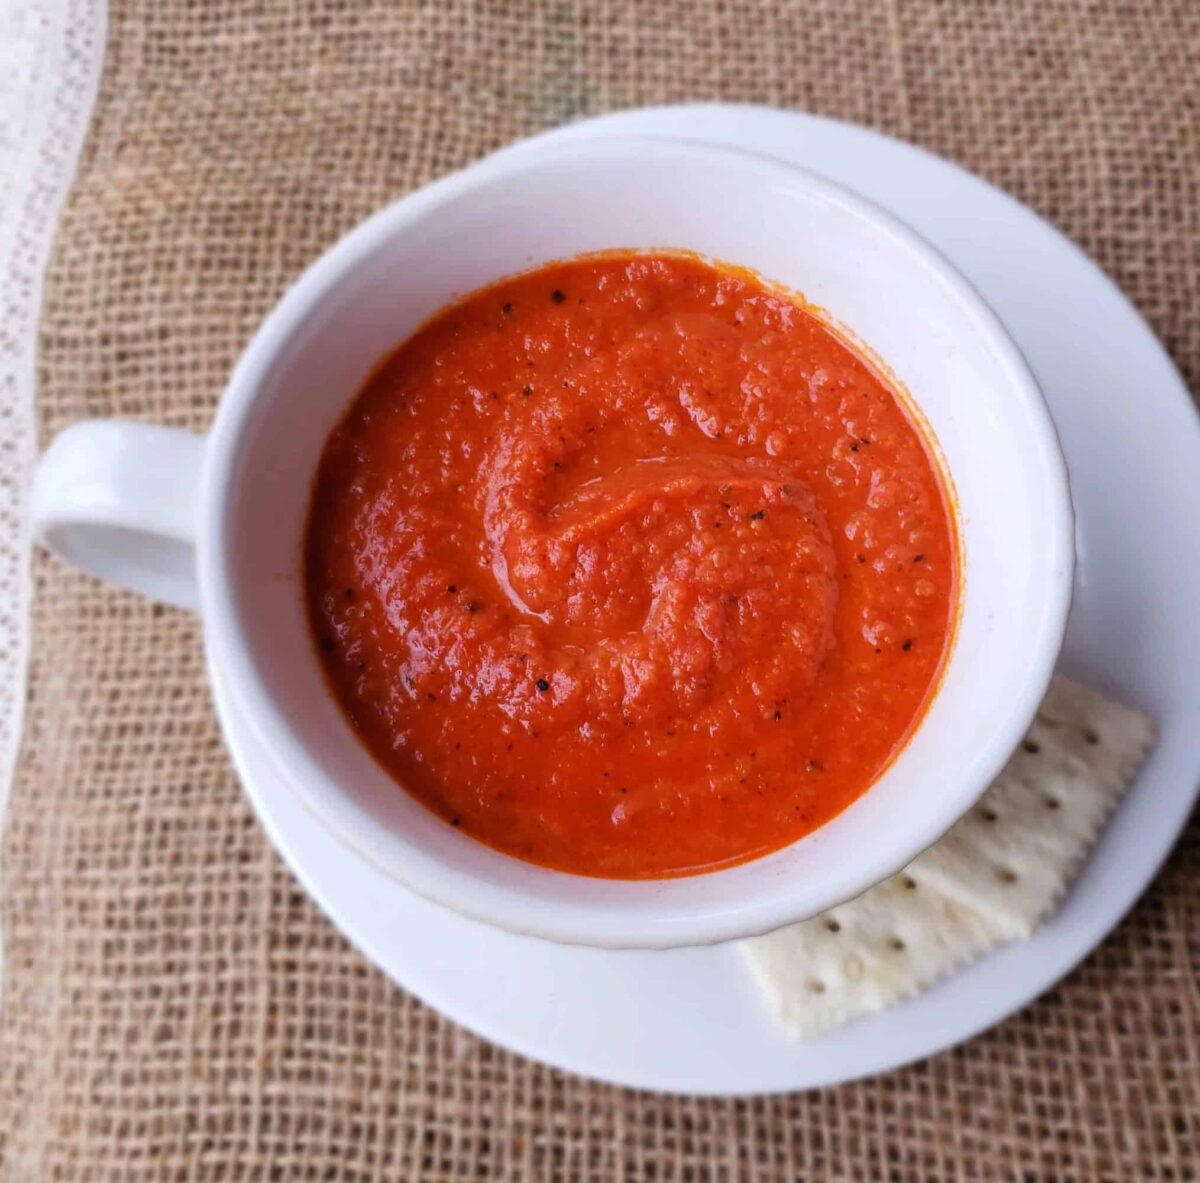  Tomato and Bread Soup swirled in a white coffee cup on a saucer with saltine crackers on the side on burlap surface